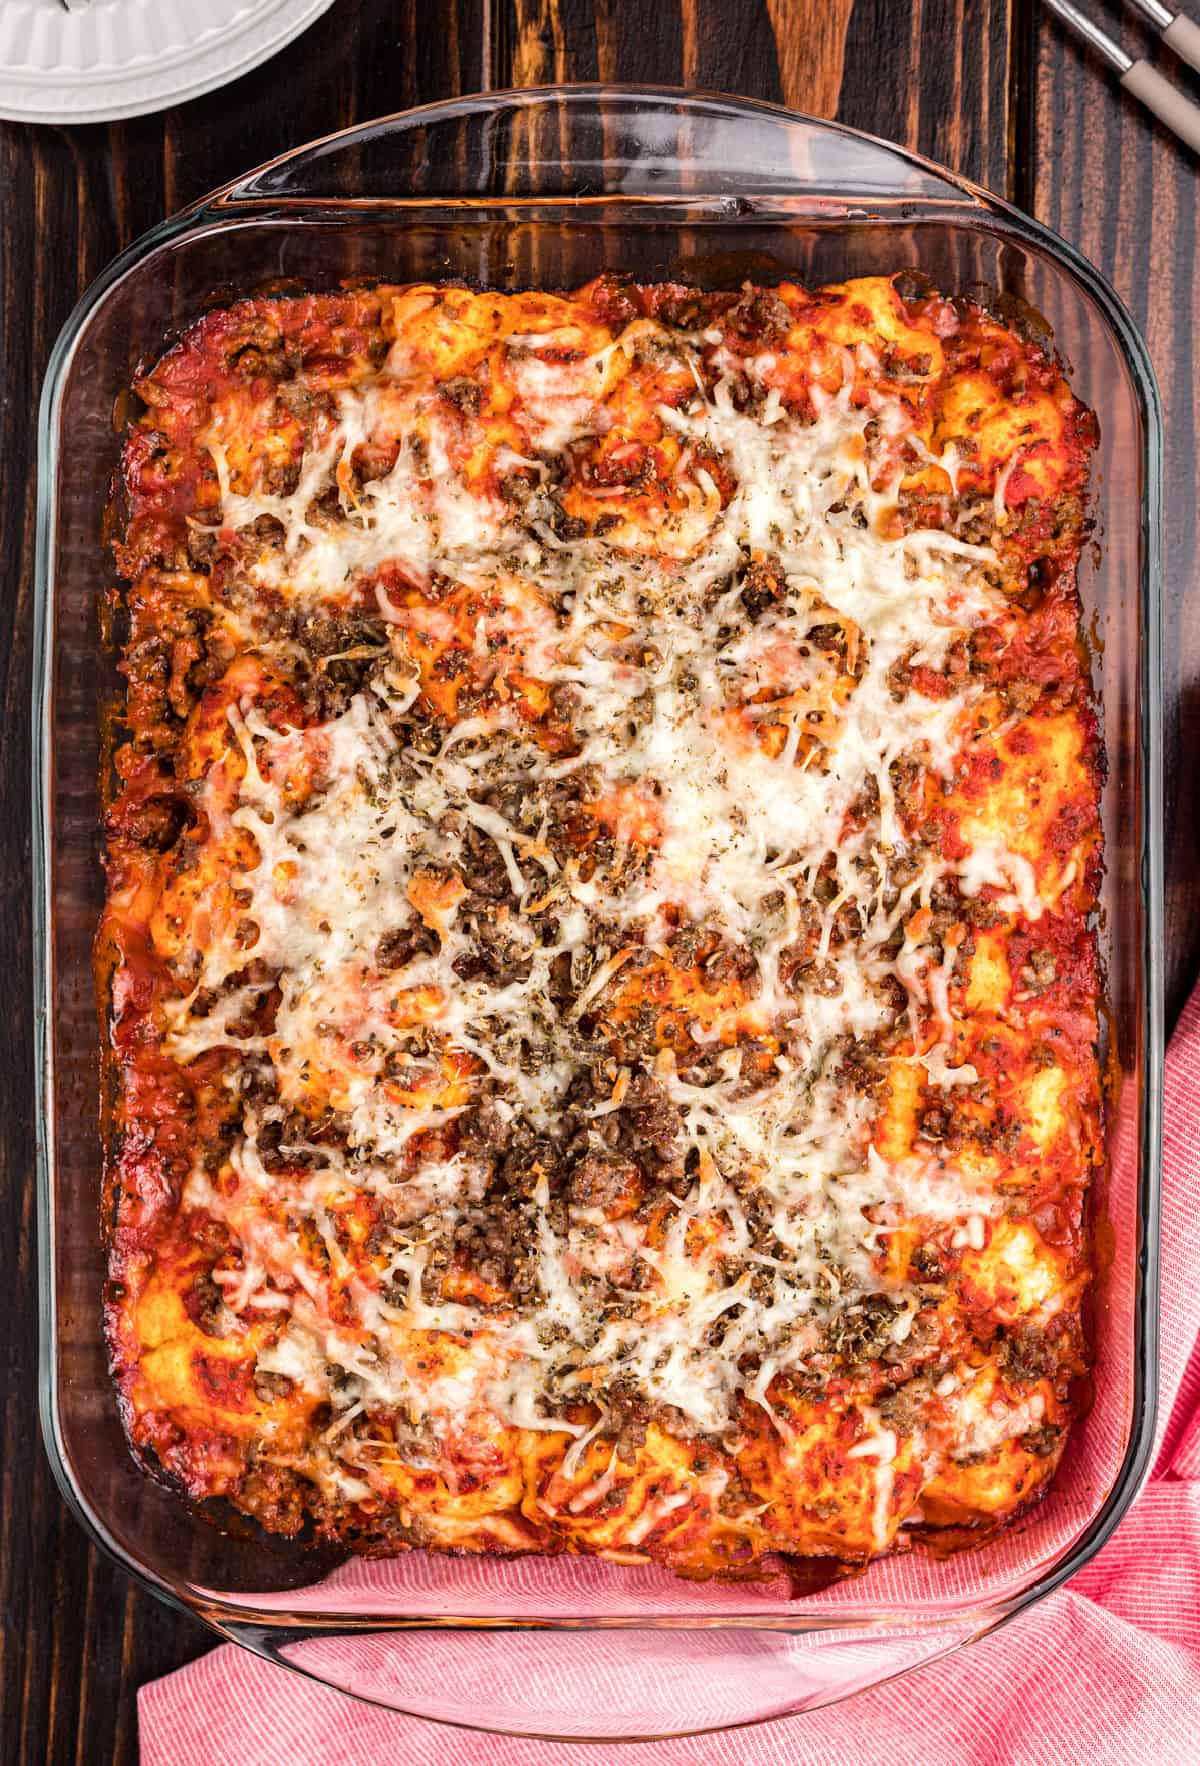 Bubble up pizza casserole baked in a 13x9 dish.